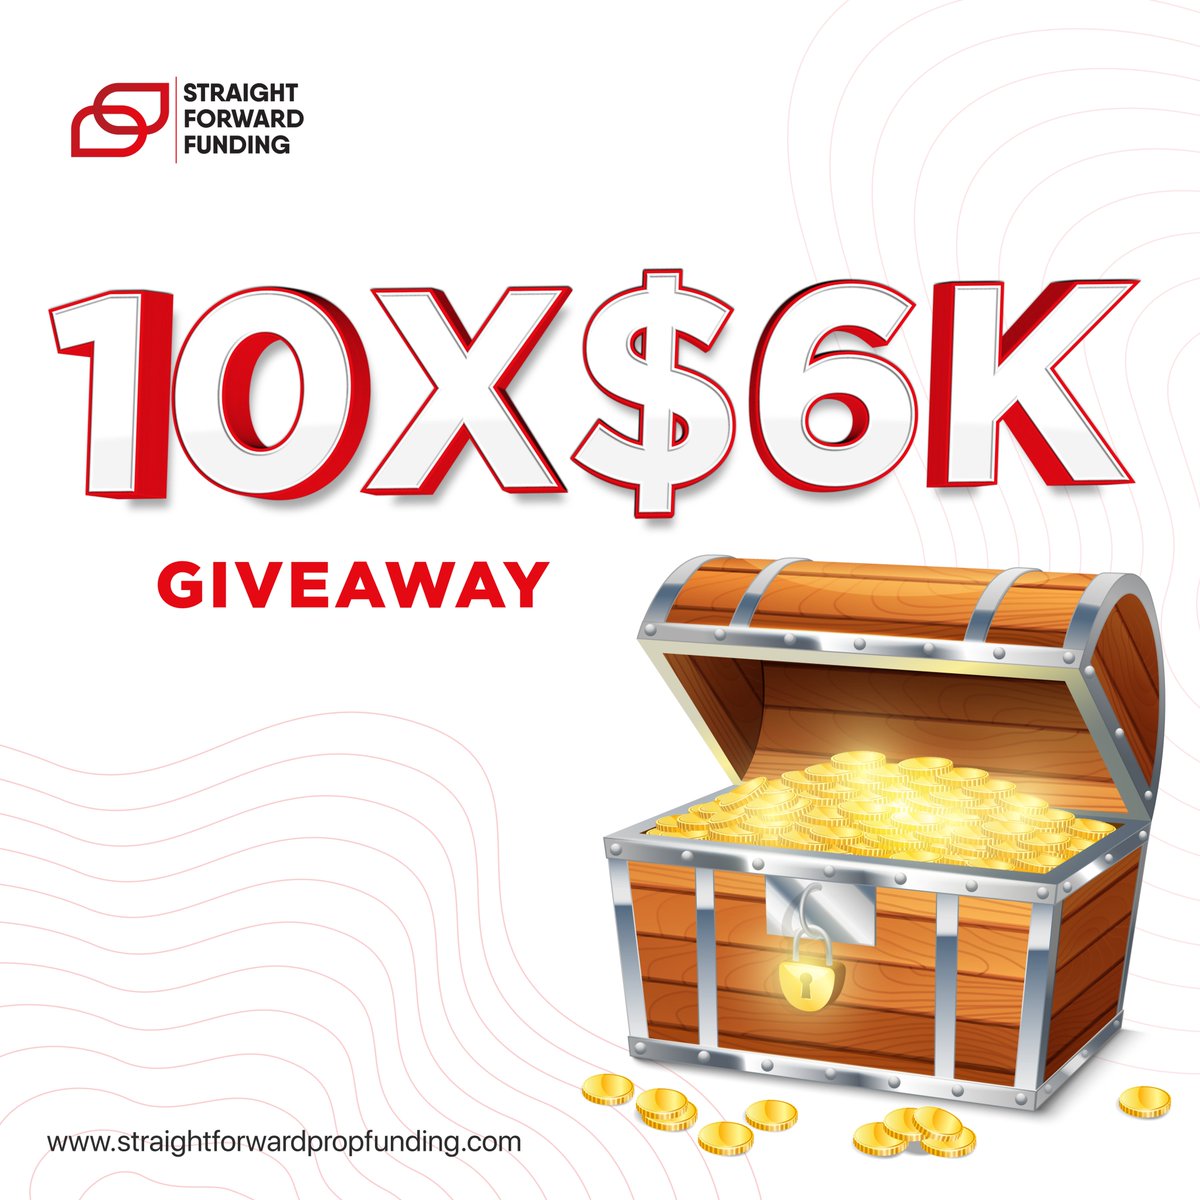 🔺PRE-LAUNCH GIVEAWAY! We are giving away 10 x $6k instant funded accounts Enter: 1️⃣ Follow @SFFfunding 2️⃣ Like & Retweet 3️⃣ Tag 3 traders! 4️⃣ Join our discord discord.gg/straightforwar… Ends in 48 hours, winners will be picked in discord.